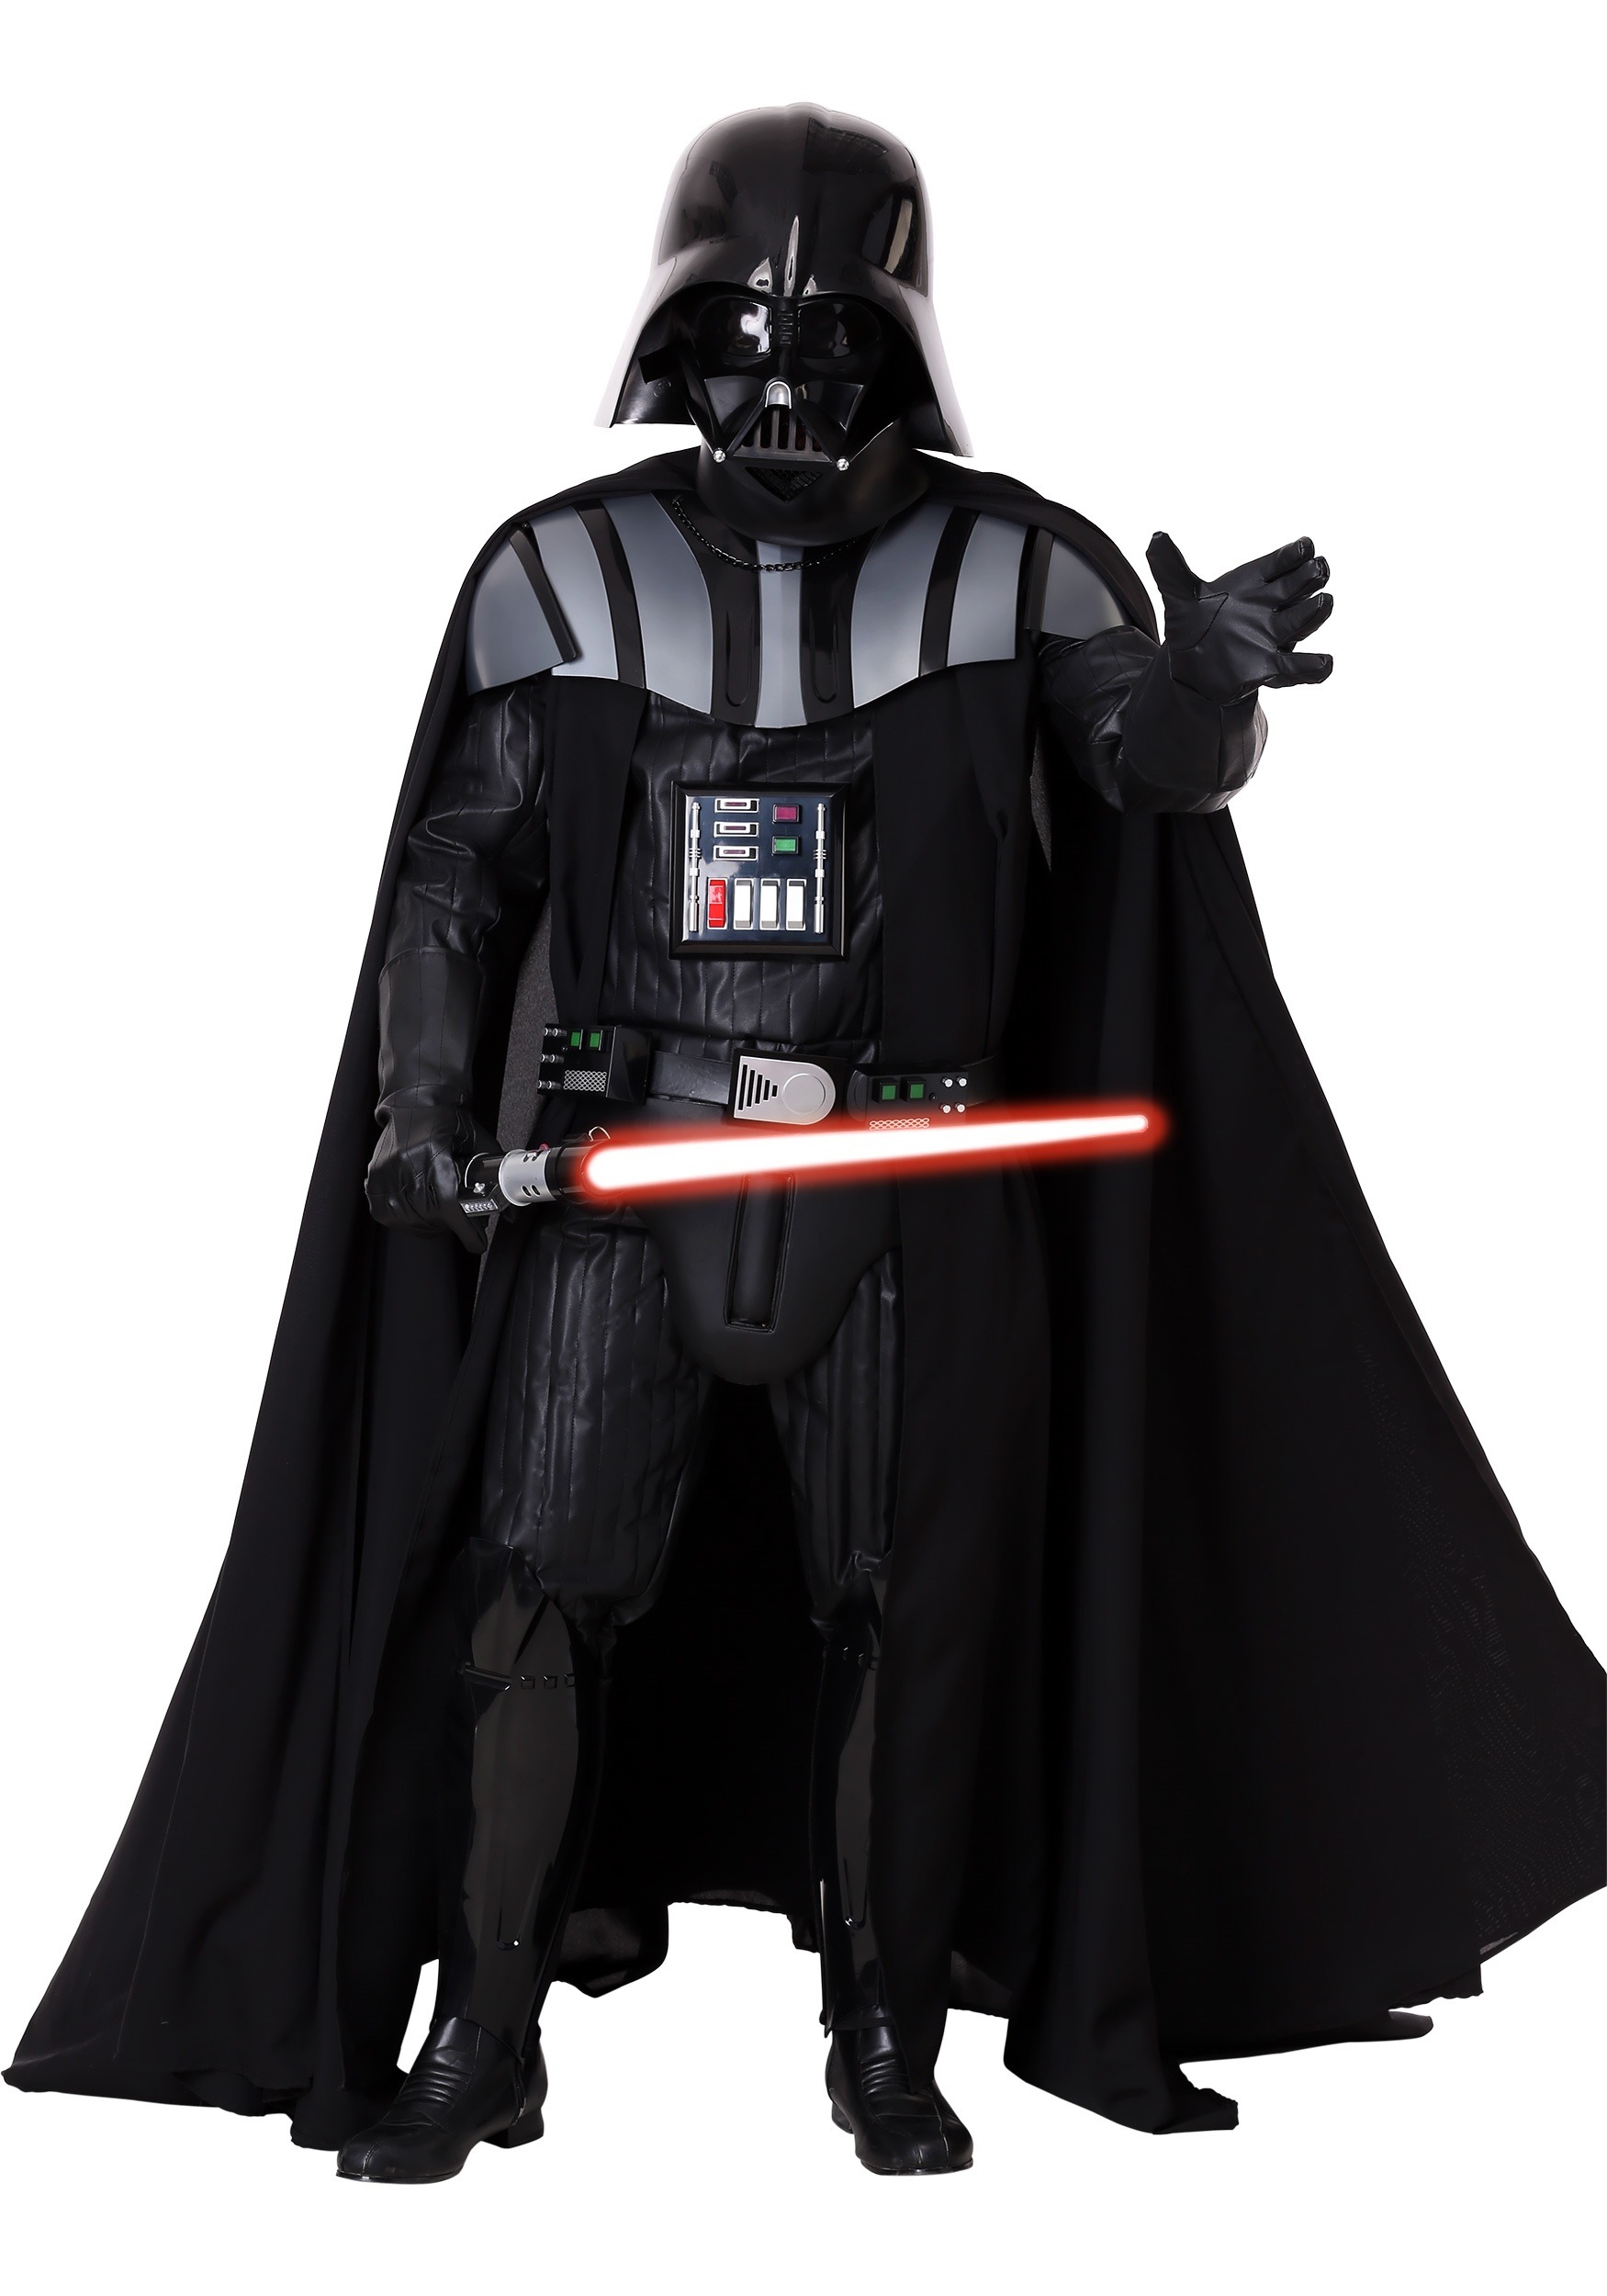 Authentic Darth Vader Ultimate Edition Costume